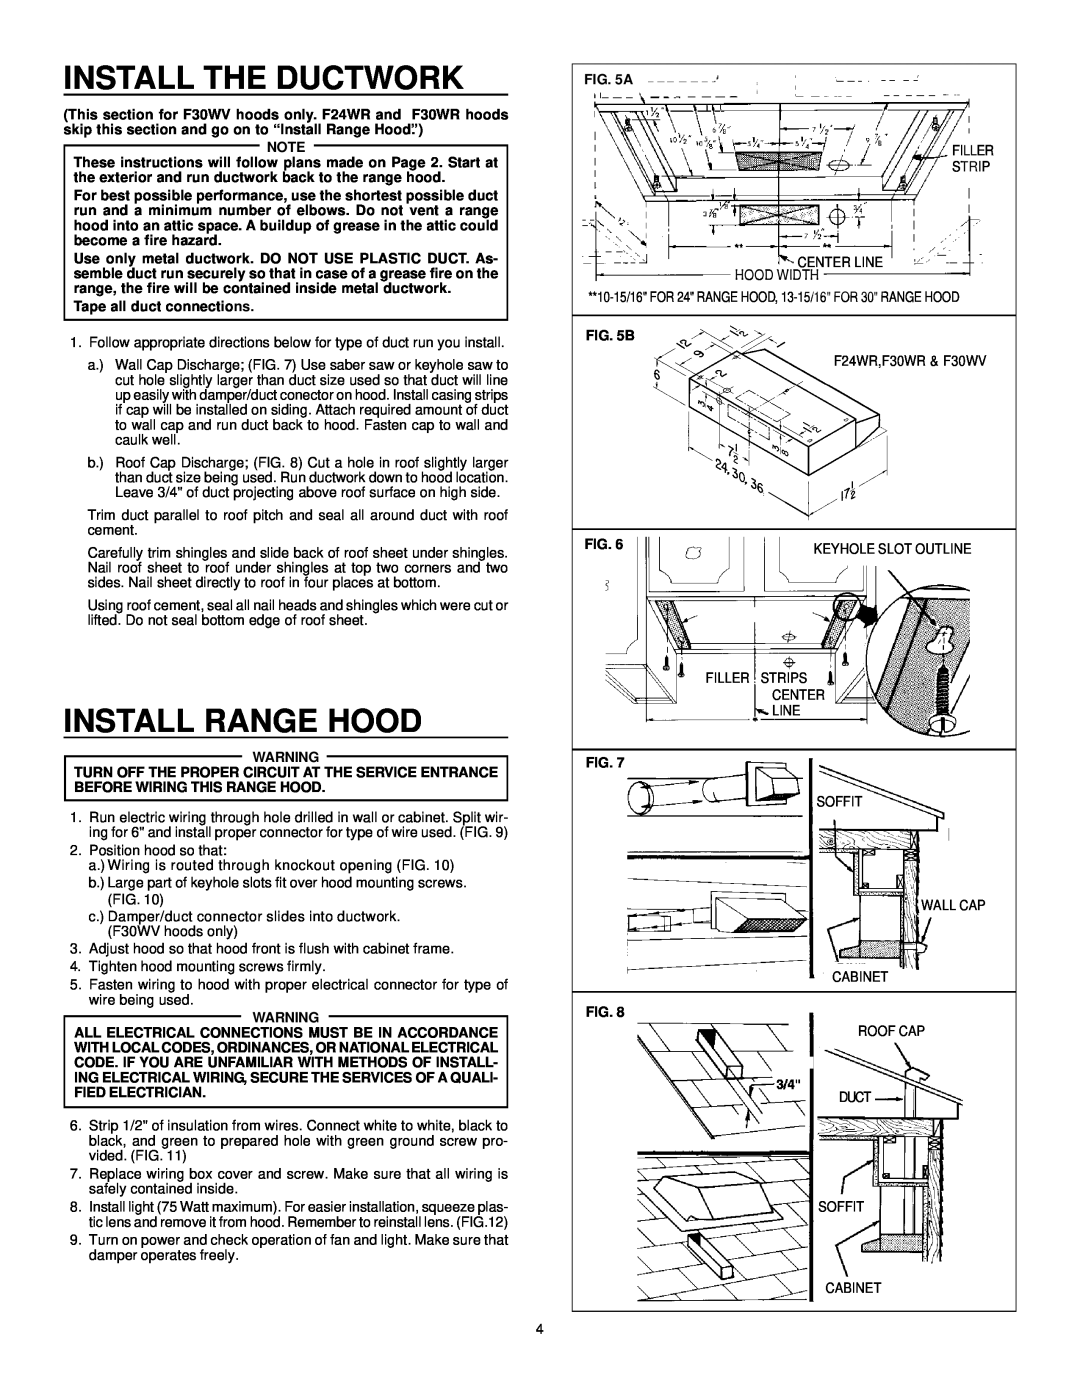 Frigidaire F30WV, F24WR, F30WR installation instructions Install The Ductwork, Install Range Hood 